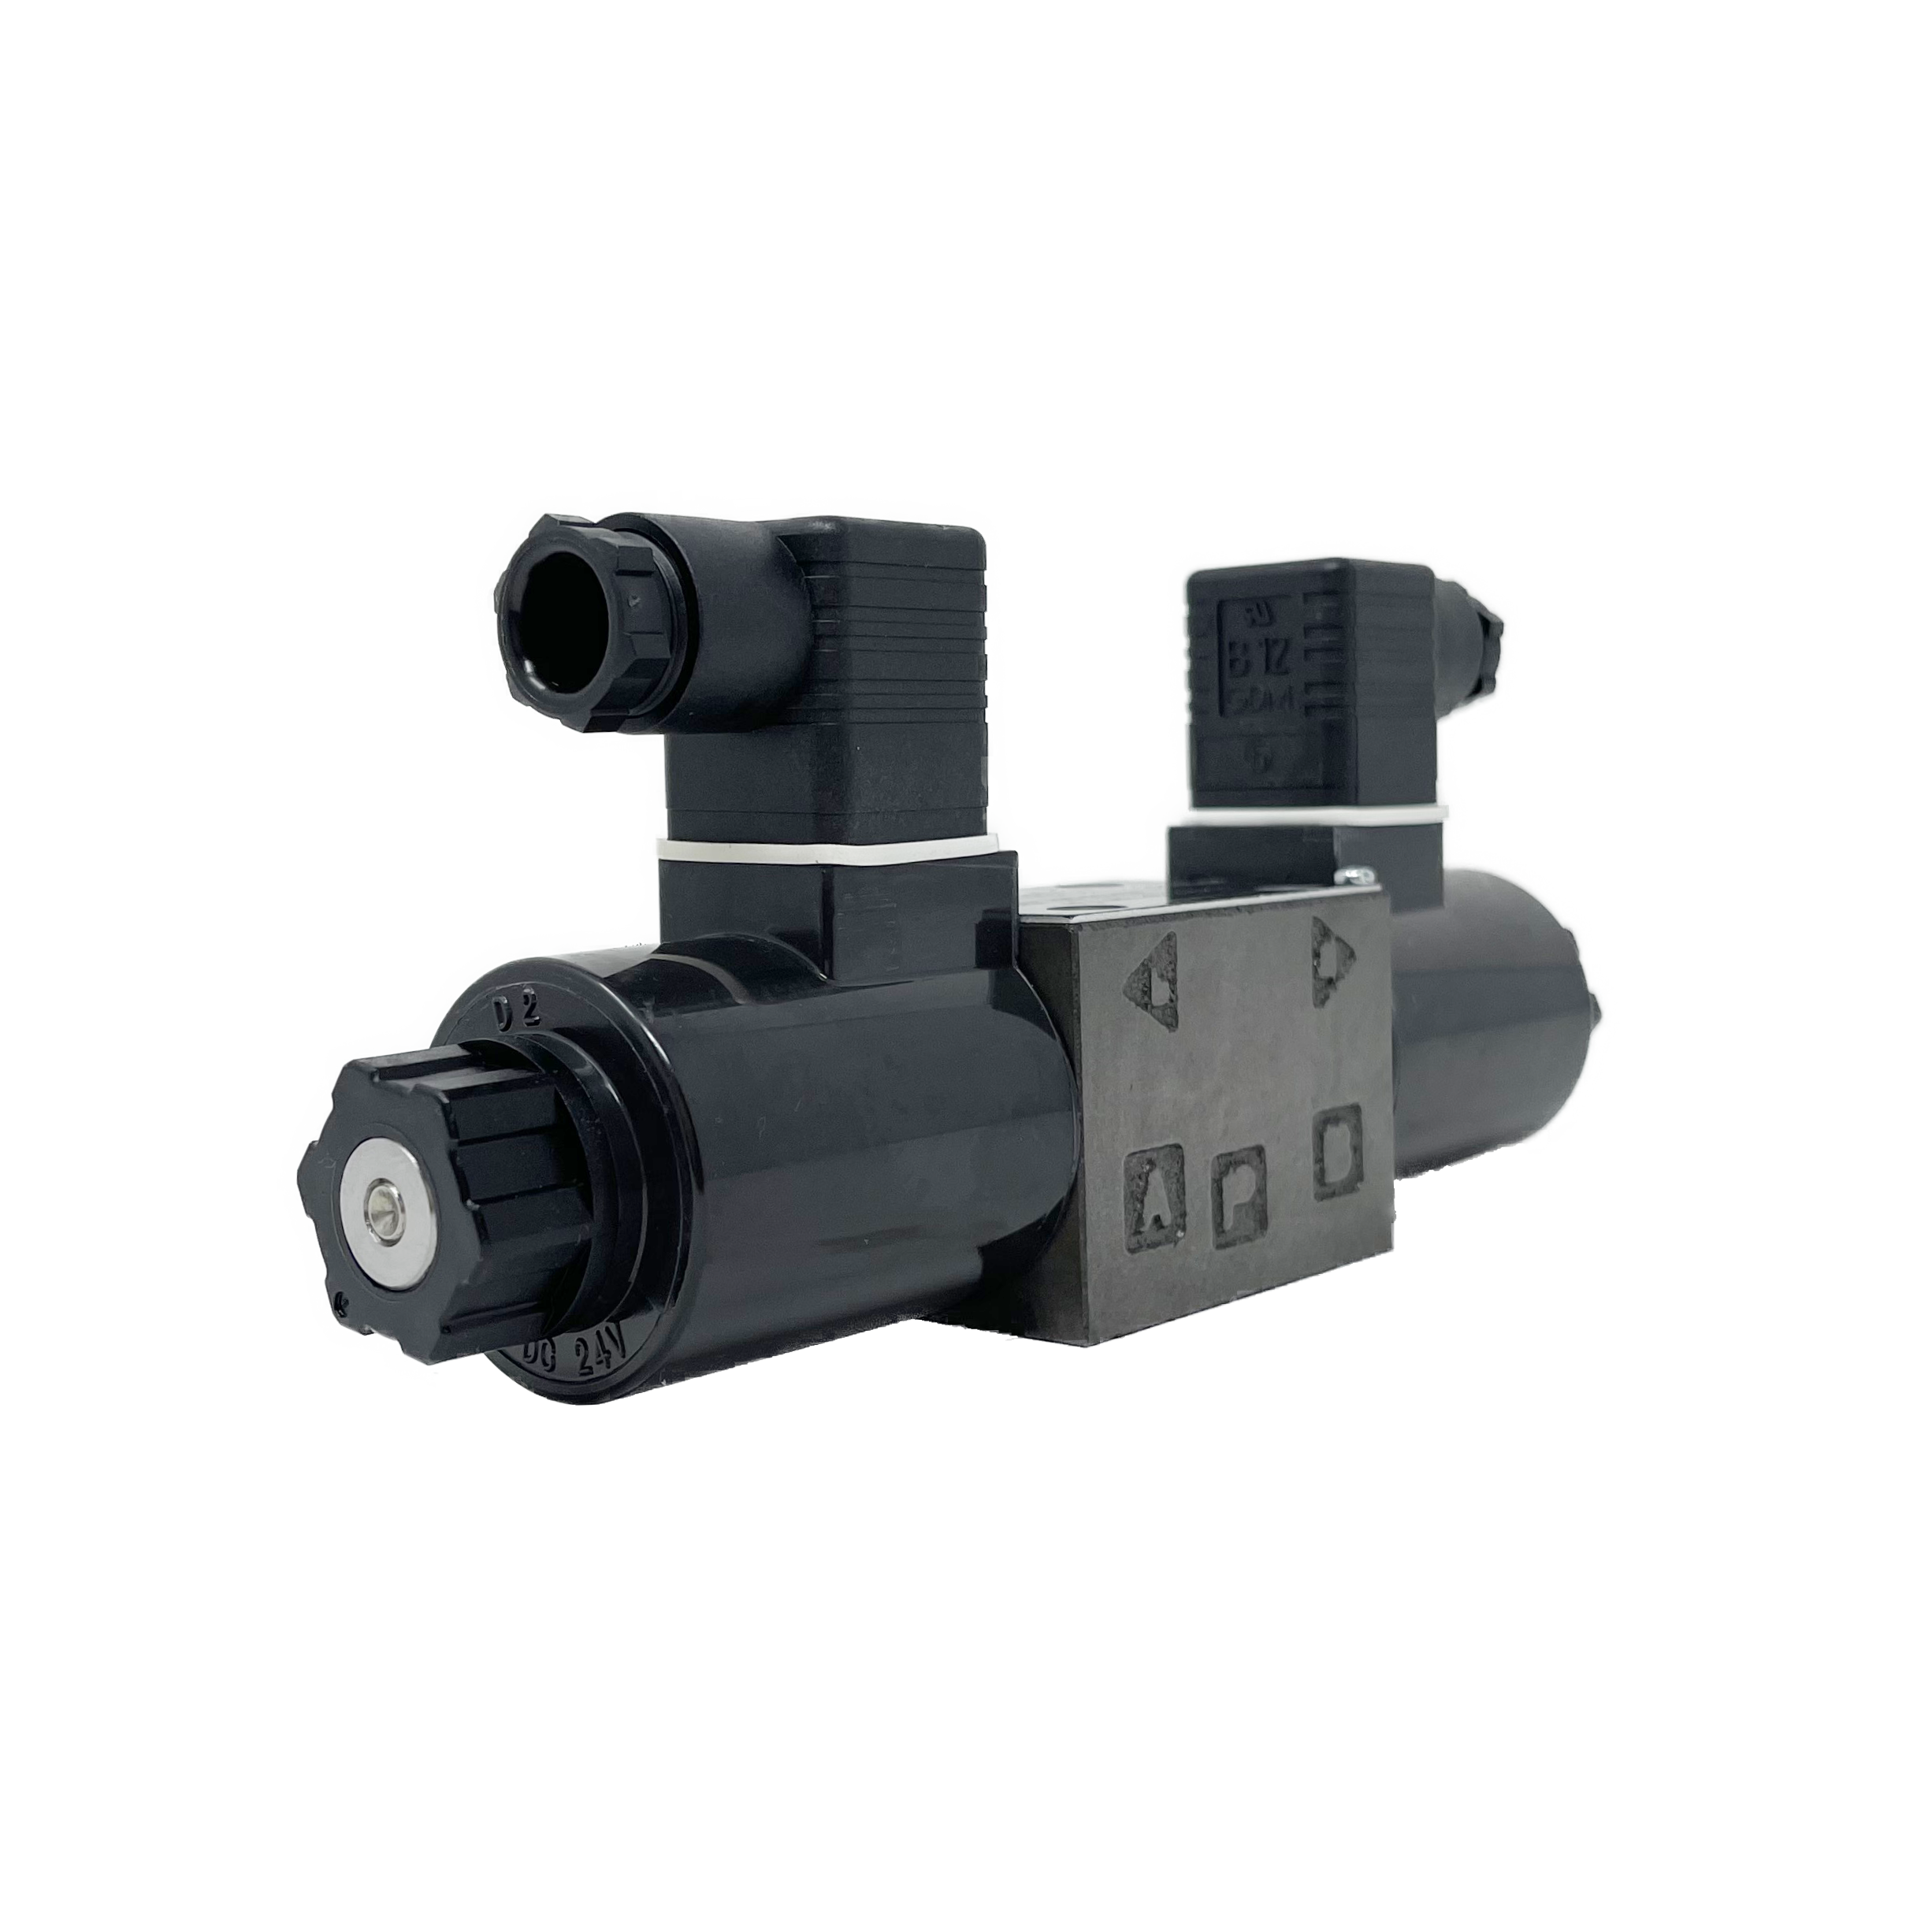 SA-G01-C4-E115-E31 : Nachi Solenoid Valve, 3P4W, D03 (NG6), DIN, D03 (NG6), 26.4GPM, 5075psi, All Ports Open Neutral, 120 VAC, DIN with Built-in Rectifier, Spring Centered